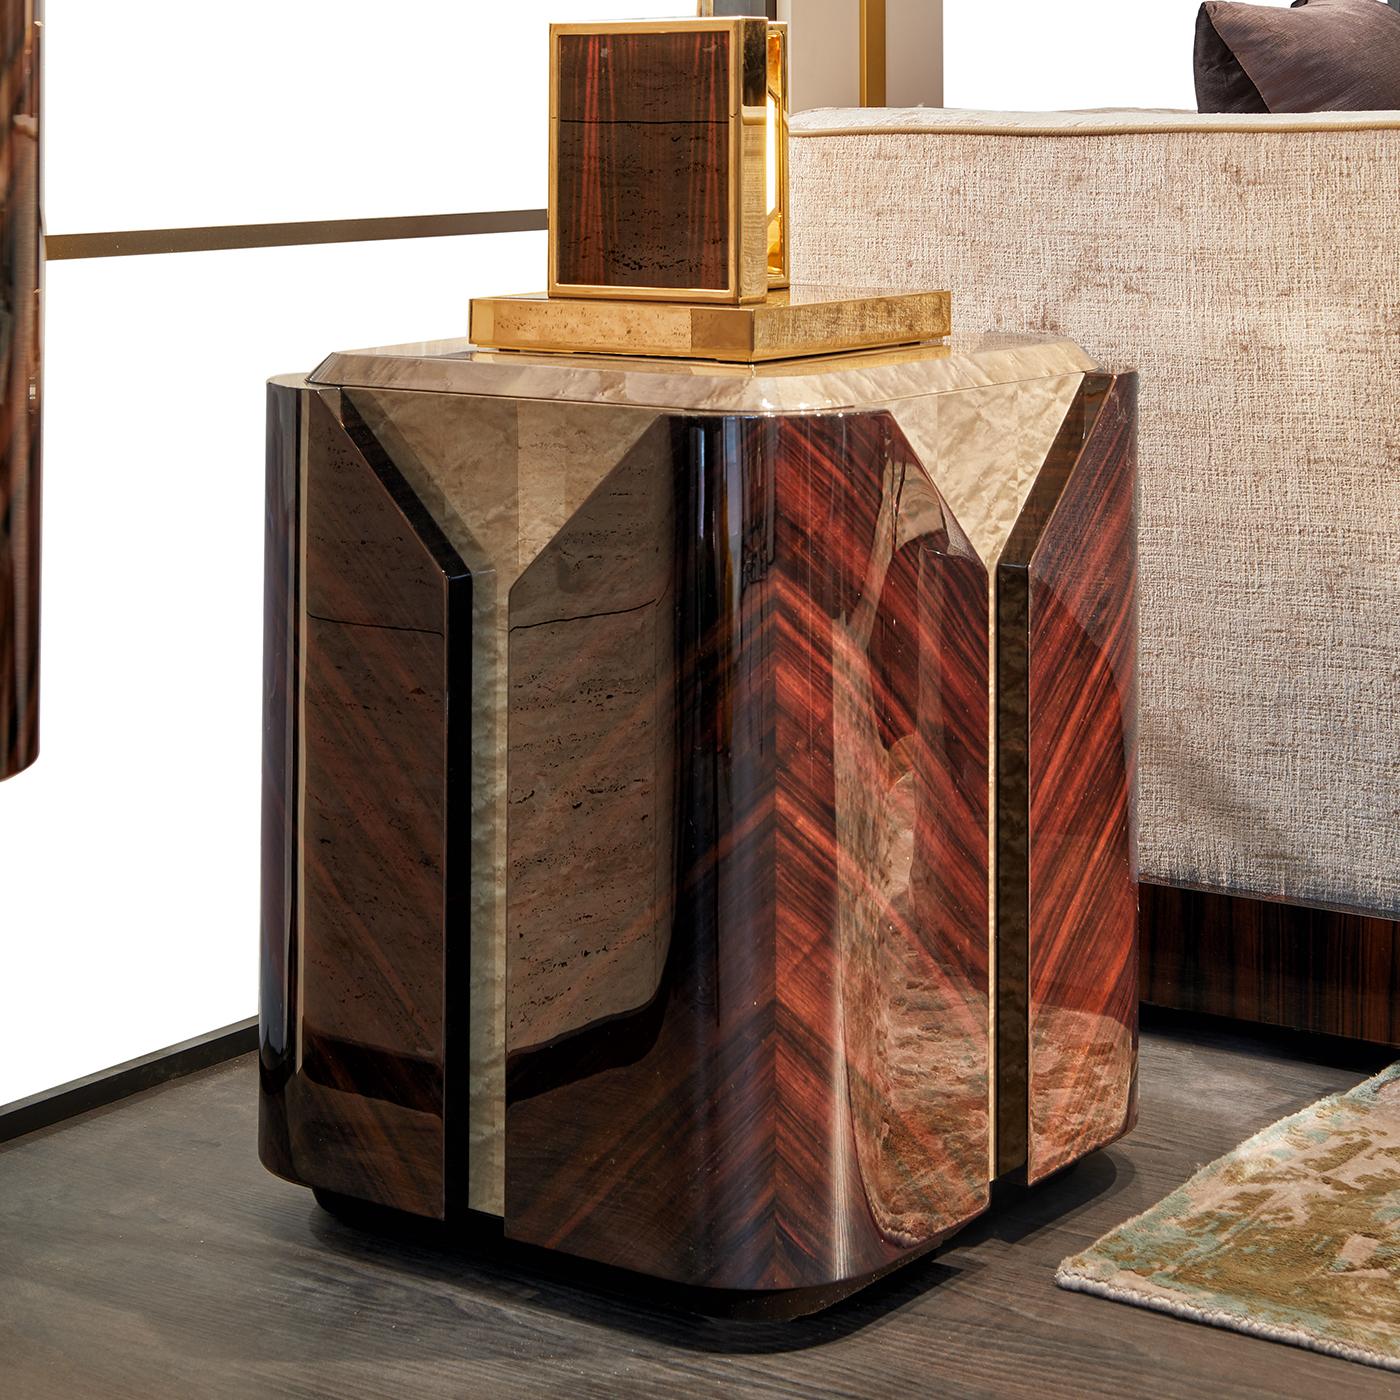 Testament to the versatility of wood, the Brody Side Table features veneers in Macassar ebony and maple in different tones and grains, creating a true visual feast. With high glossy finishes to best bring out the wood's beauty, the table is a